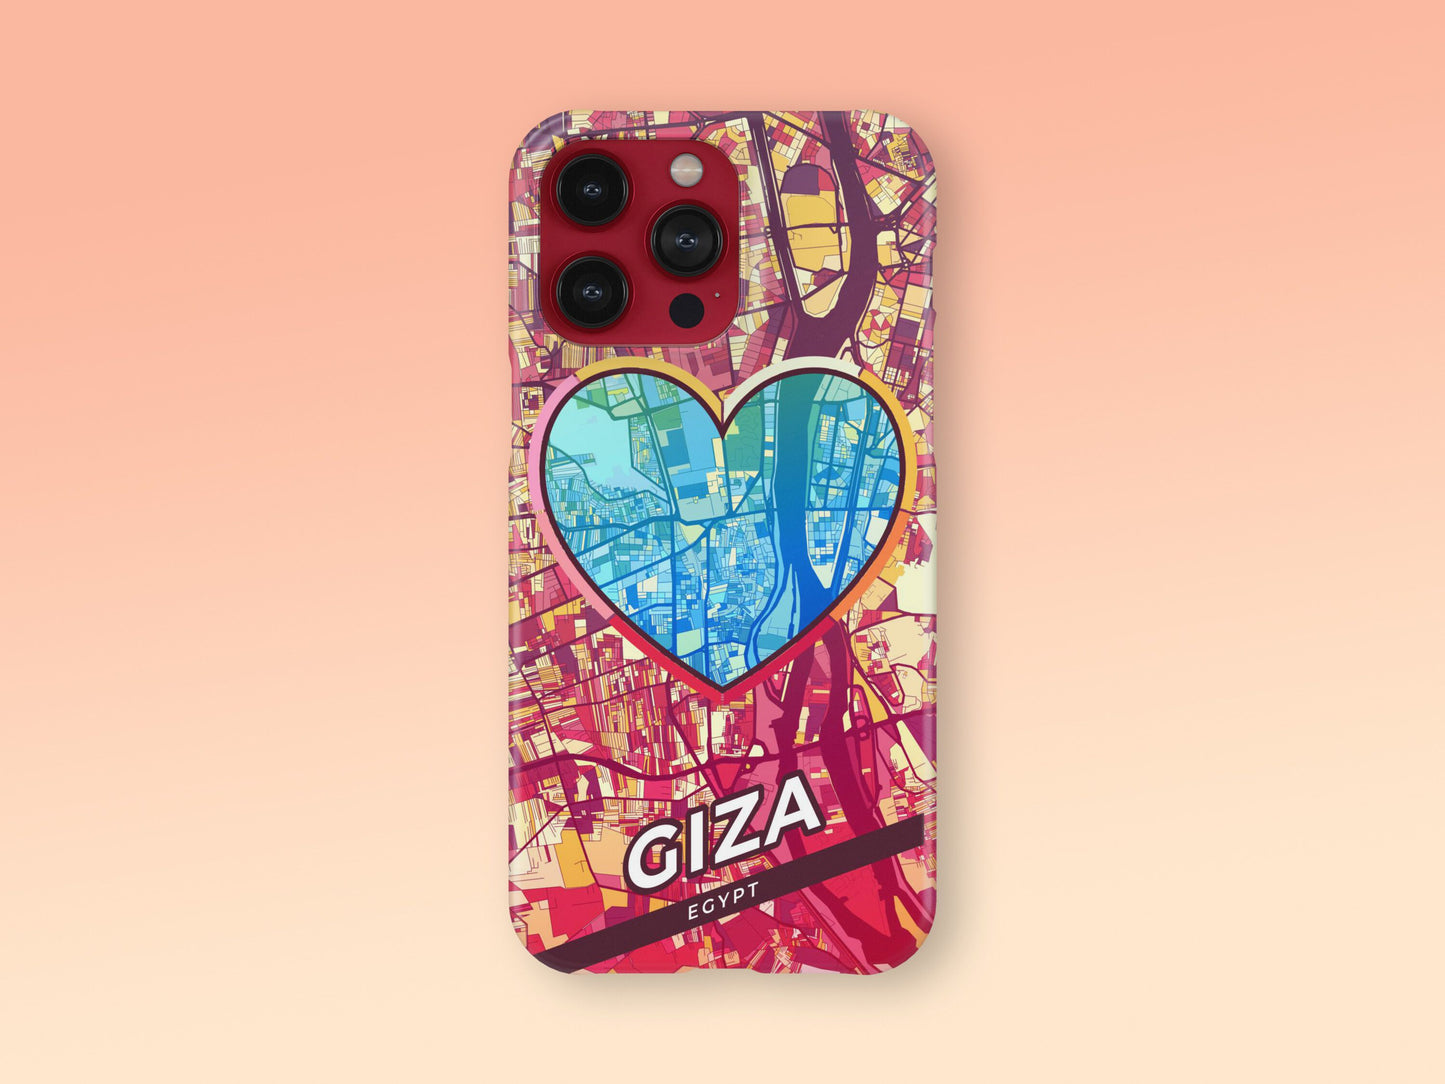 Giza Egypt slim phone case with colorful icon. Birthday, wedding or housewarming gift. Couple match cases. 2